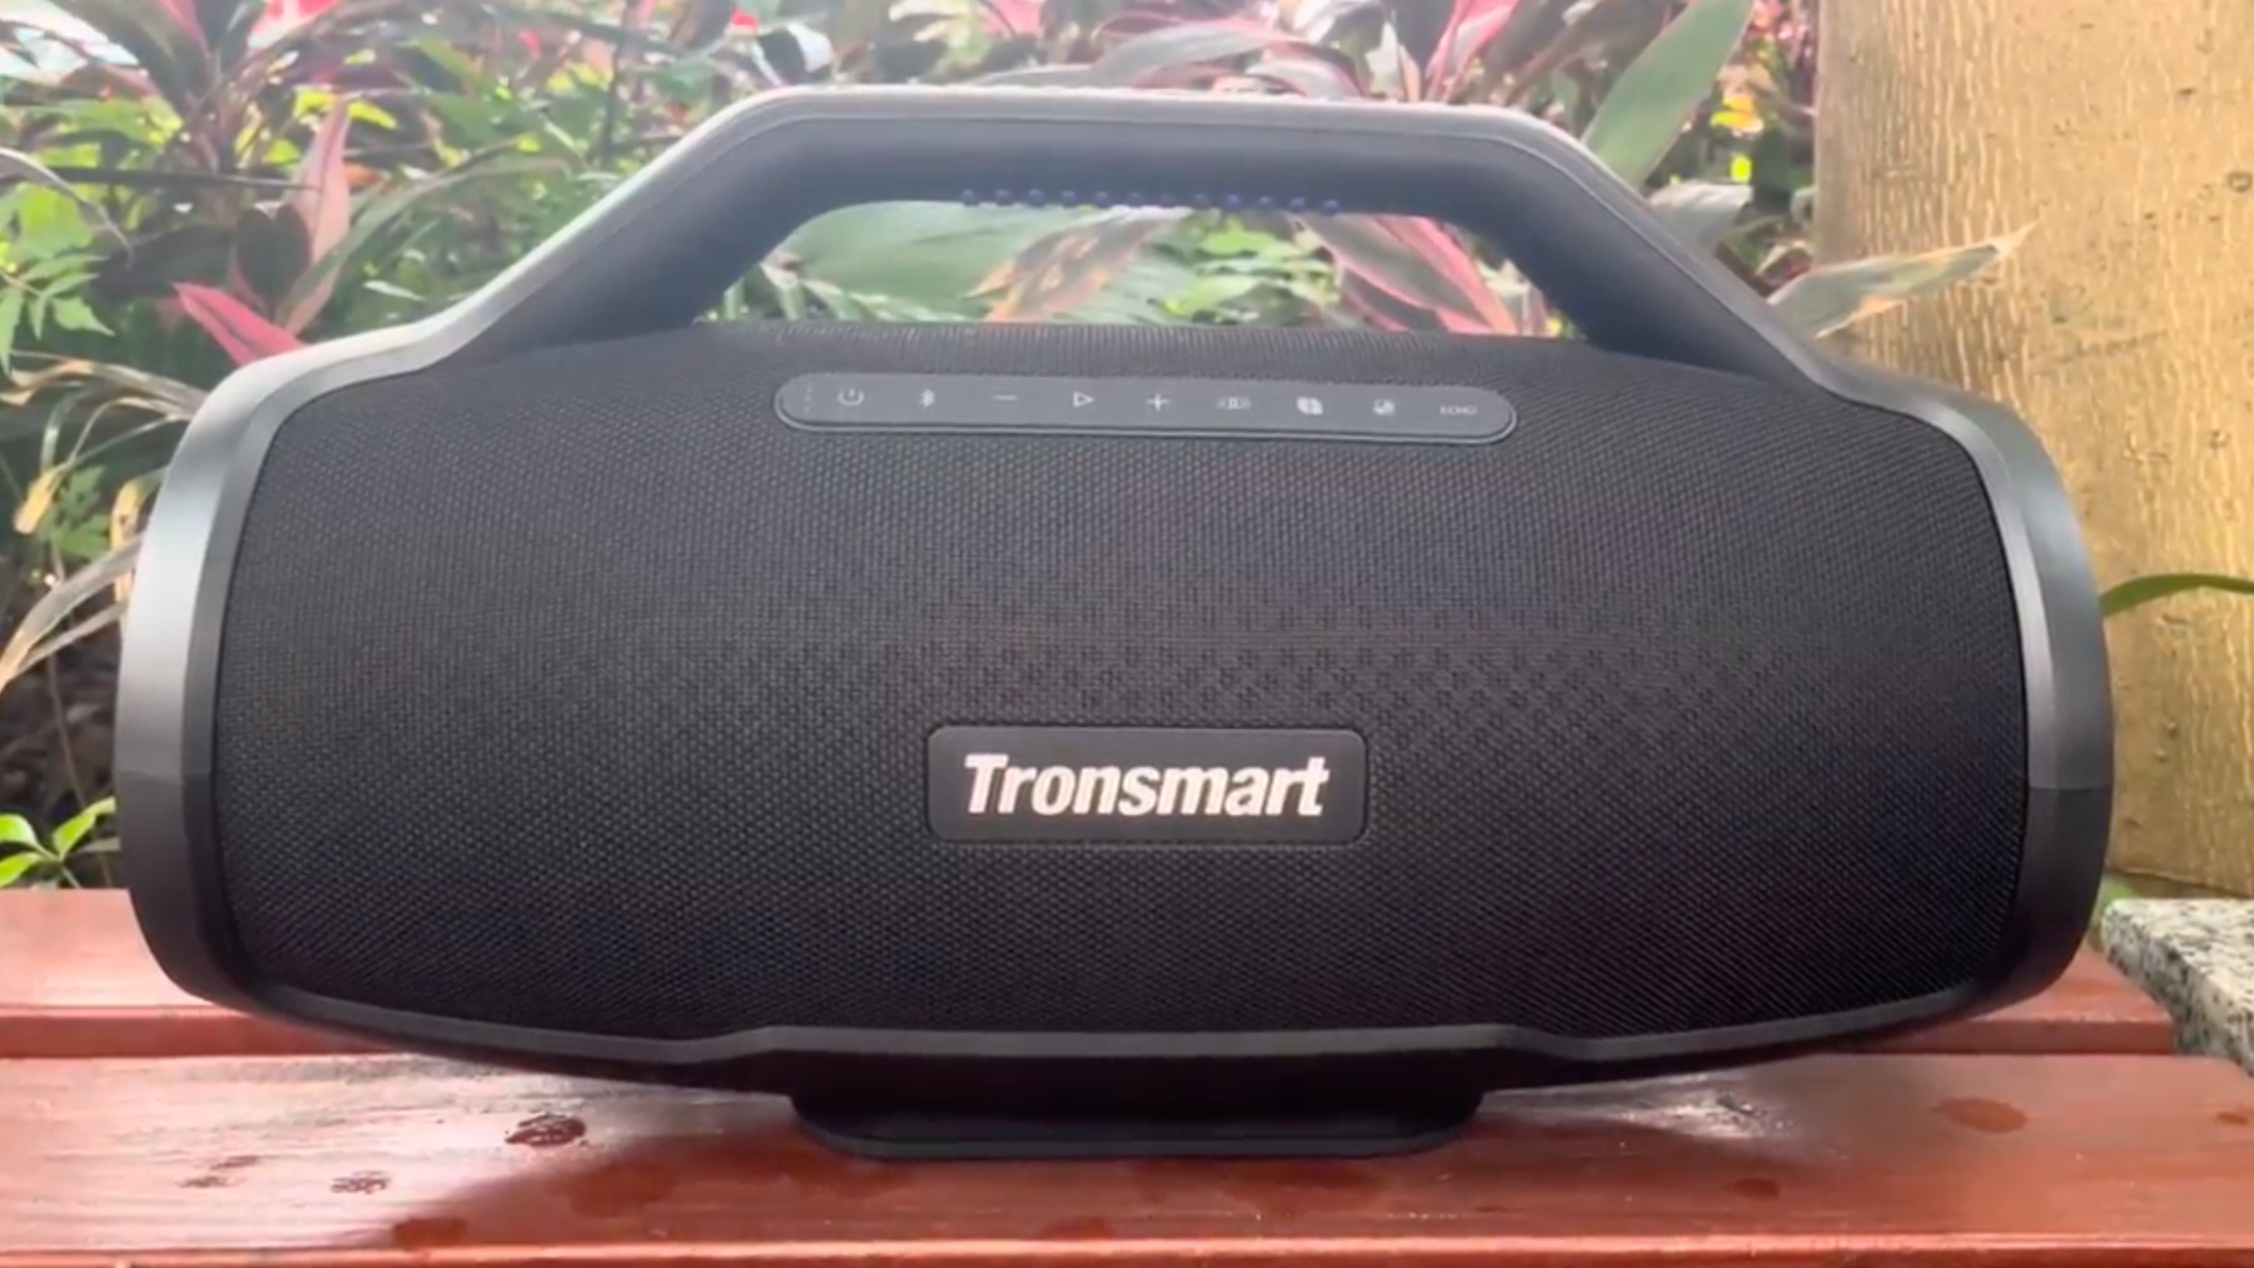 Tronsmart BANG MAX Portable 130W Party Speaker Test & Review 